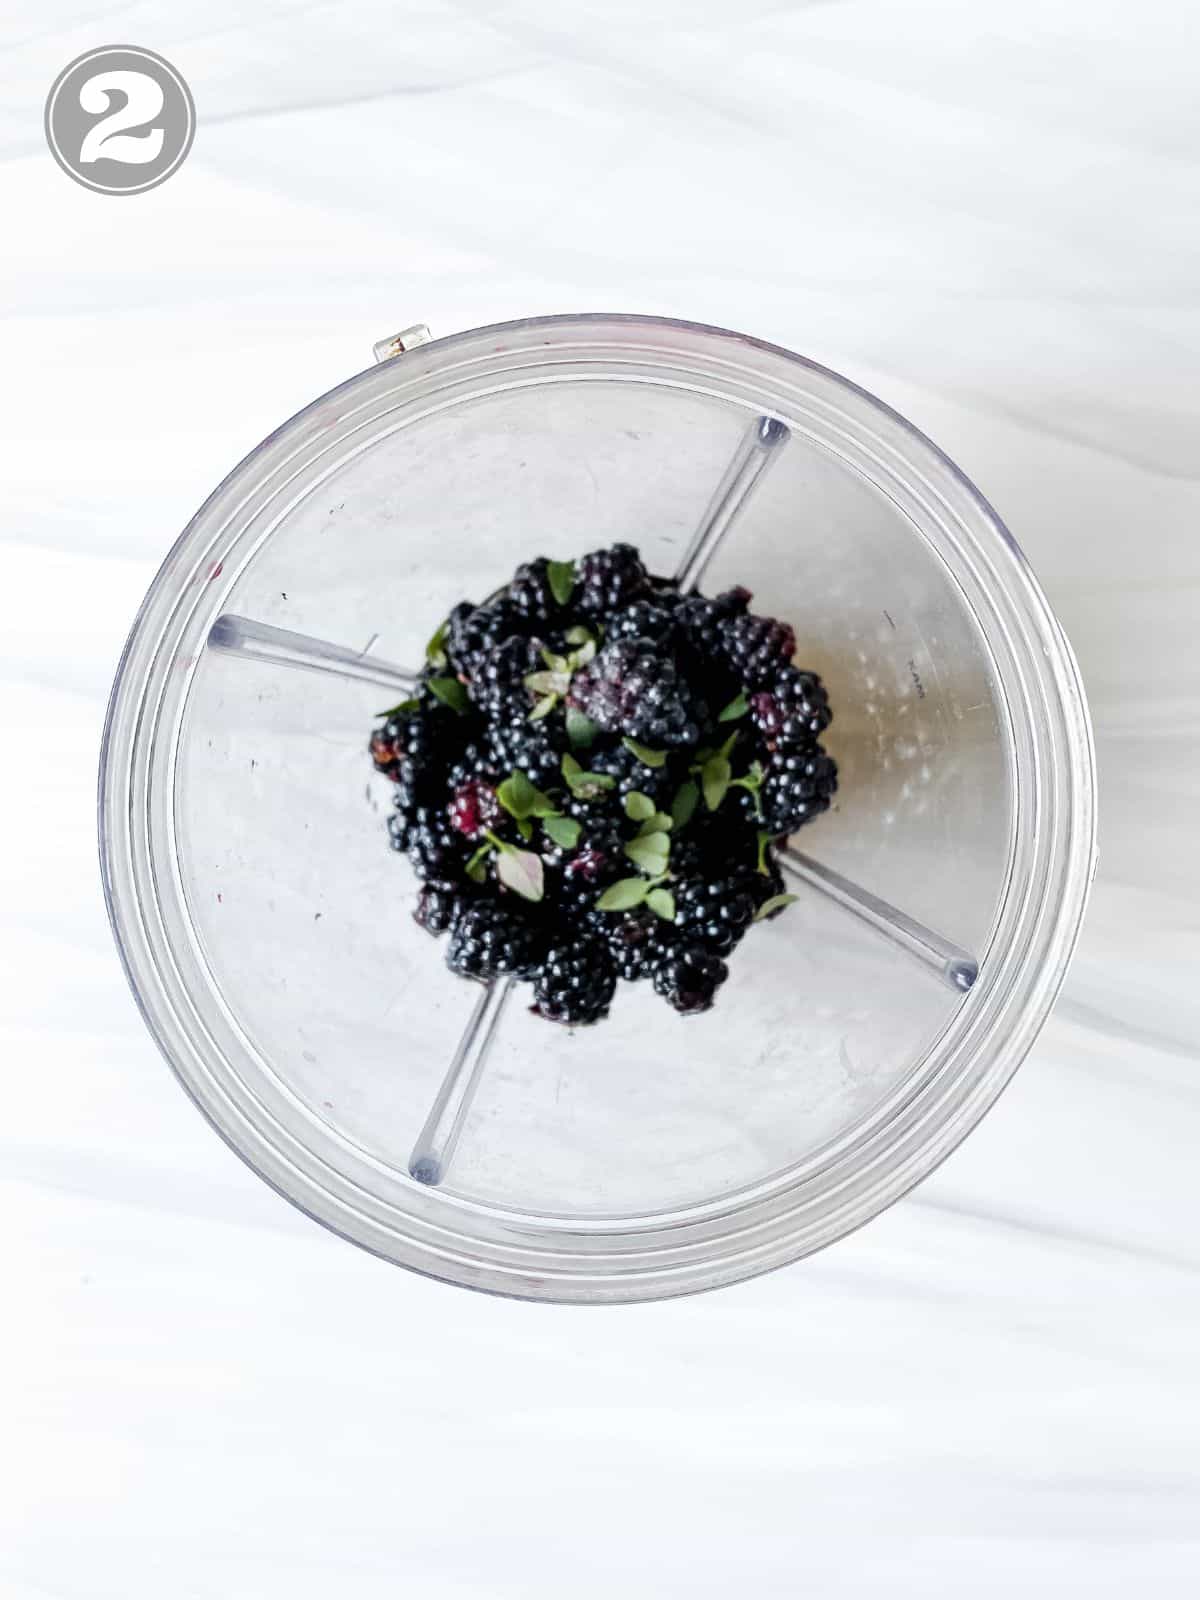 blackberries and thyme leaves in a blender cup.